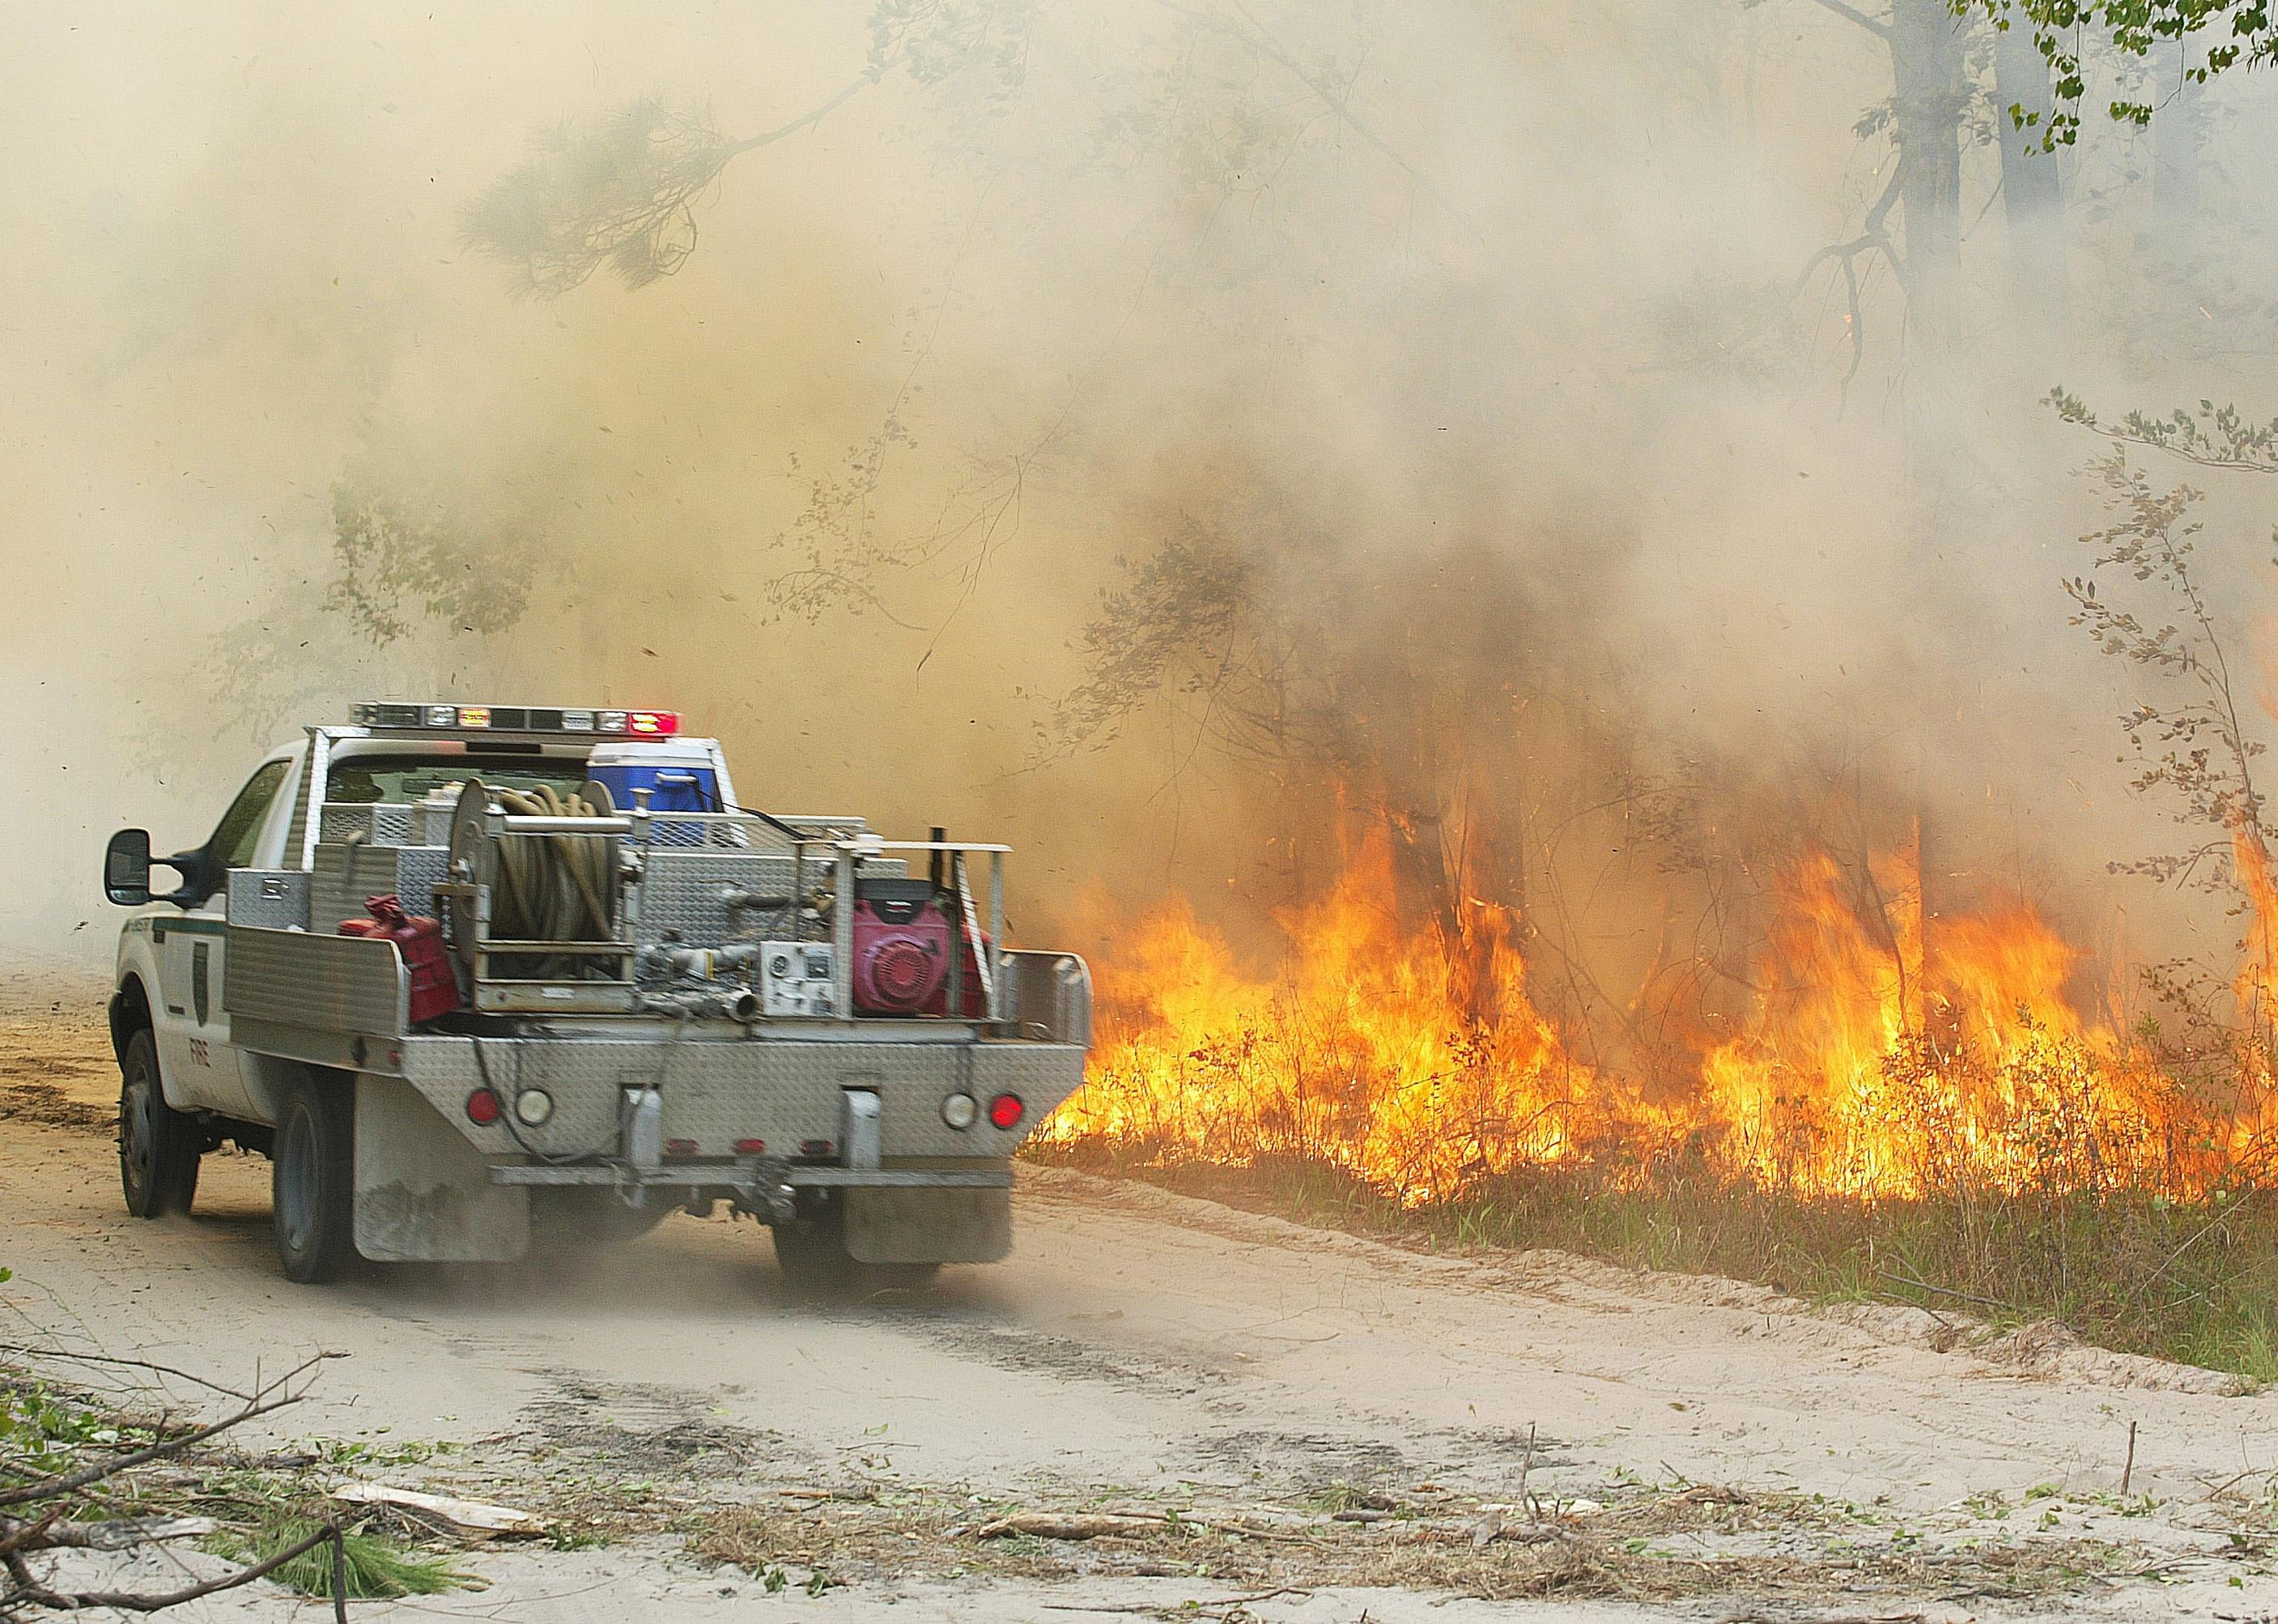 A forest service vehicle drives past a fire burning in a wooded area.